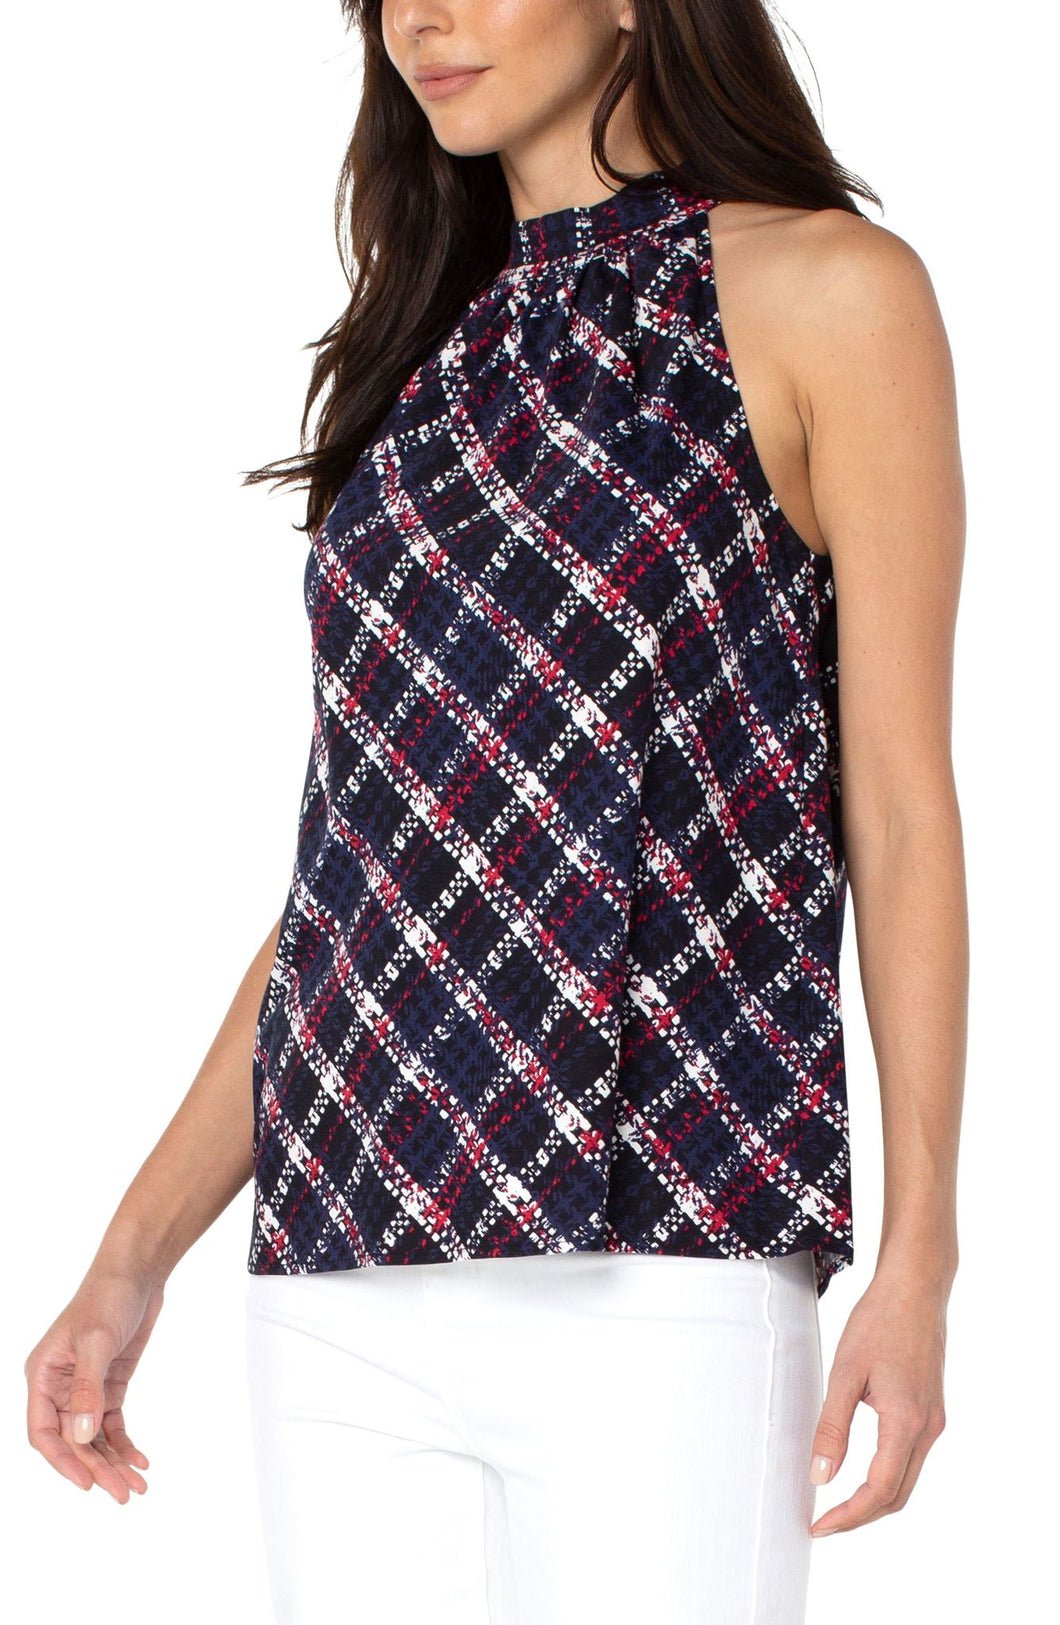 A beautiful statement piece, this sleeveless mock neck tank will take you effortlessly from day to evening. Unique textured plaid in colors of lollipop red, white and navy pairs beautifully with jeans, white bottoms and shorts. Textured bold stripes crisscross and give this fabulous top a chic look. 